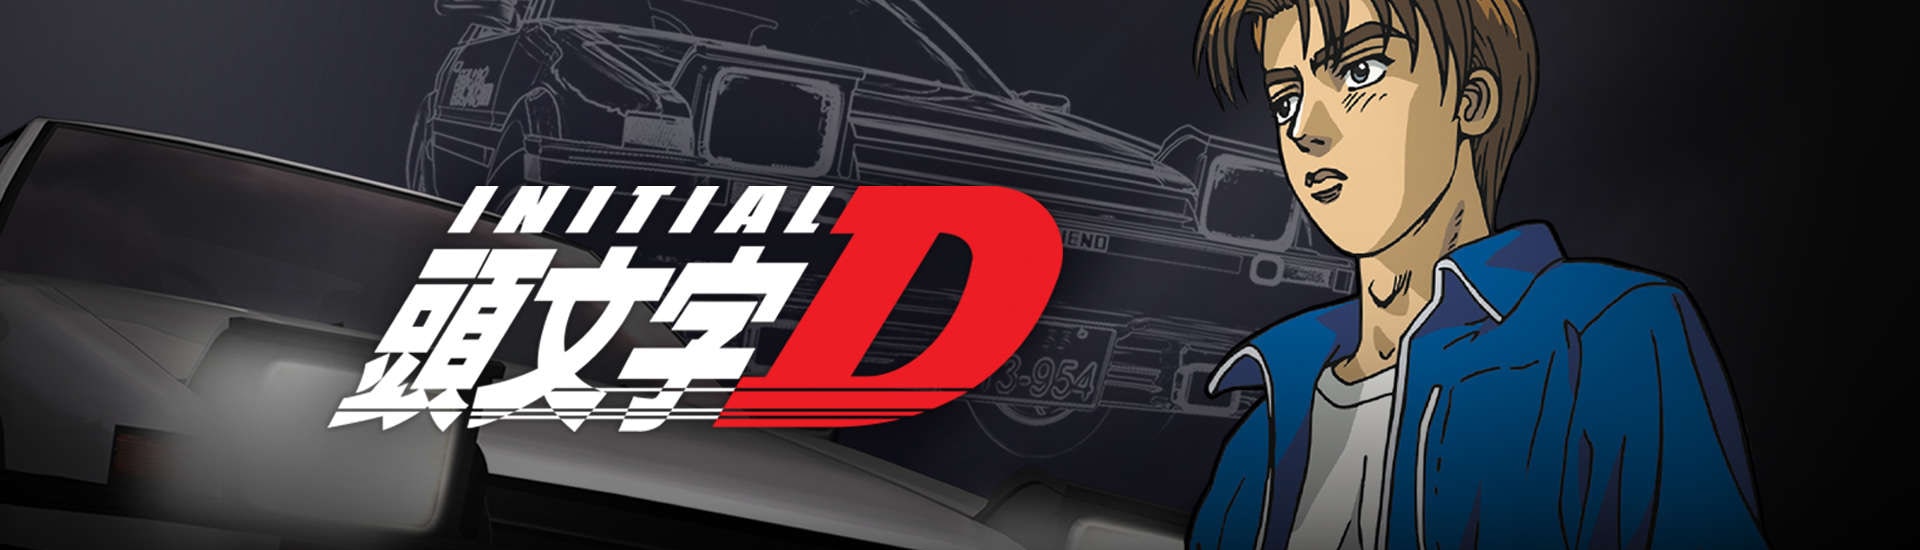 Assistir Initial D First Stage ep 19 HD Online - Animes Online